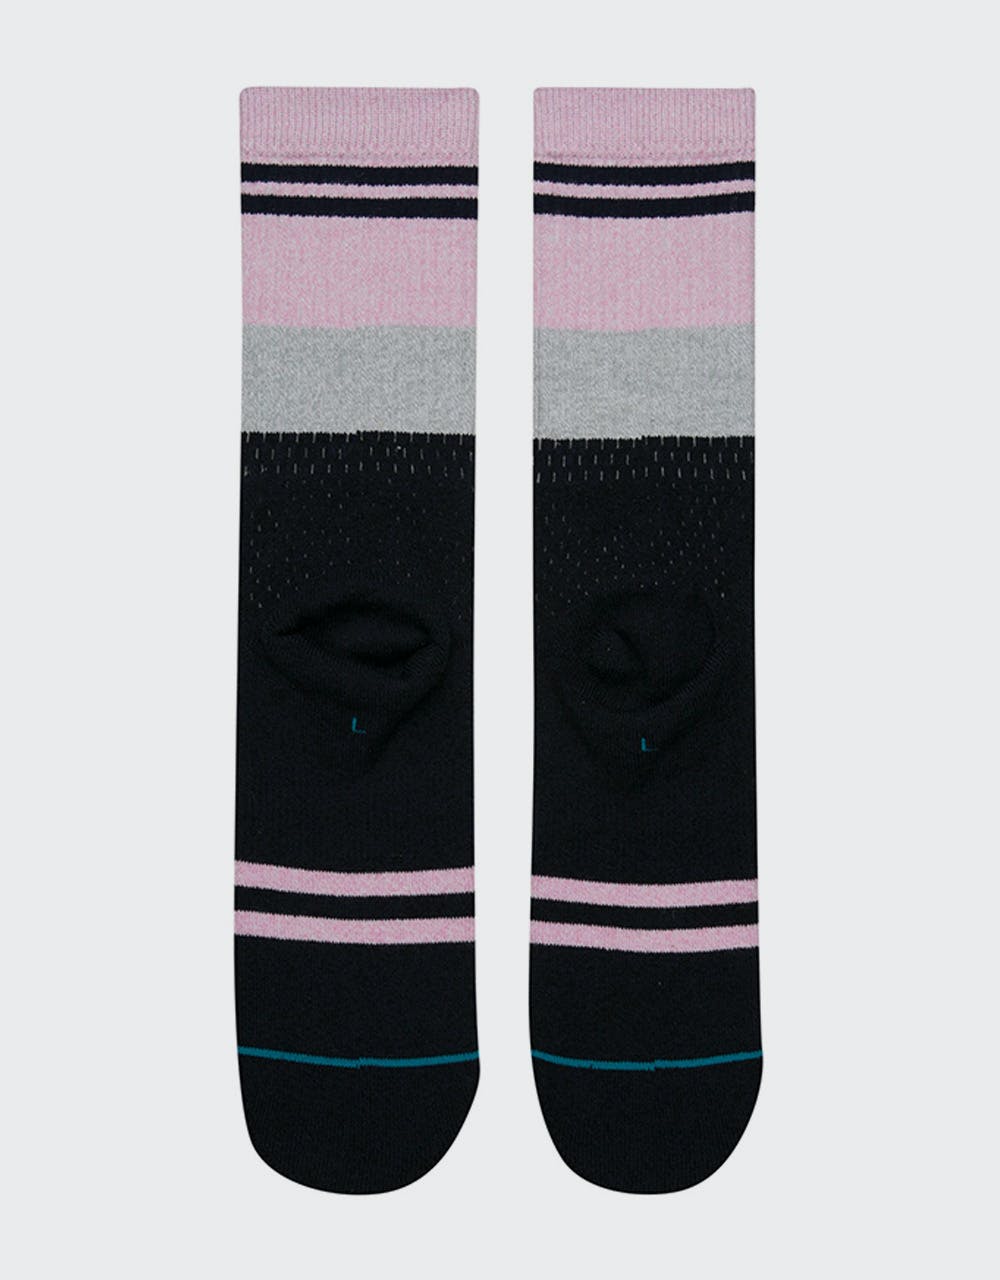 Stance Early Classic Crew Socks - Navy